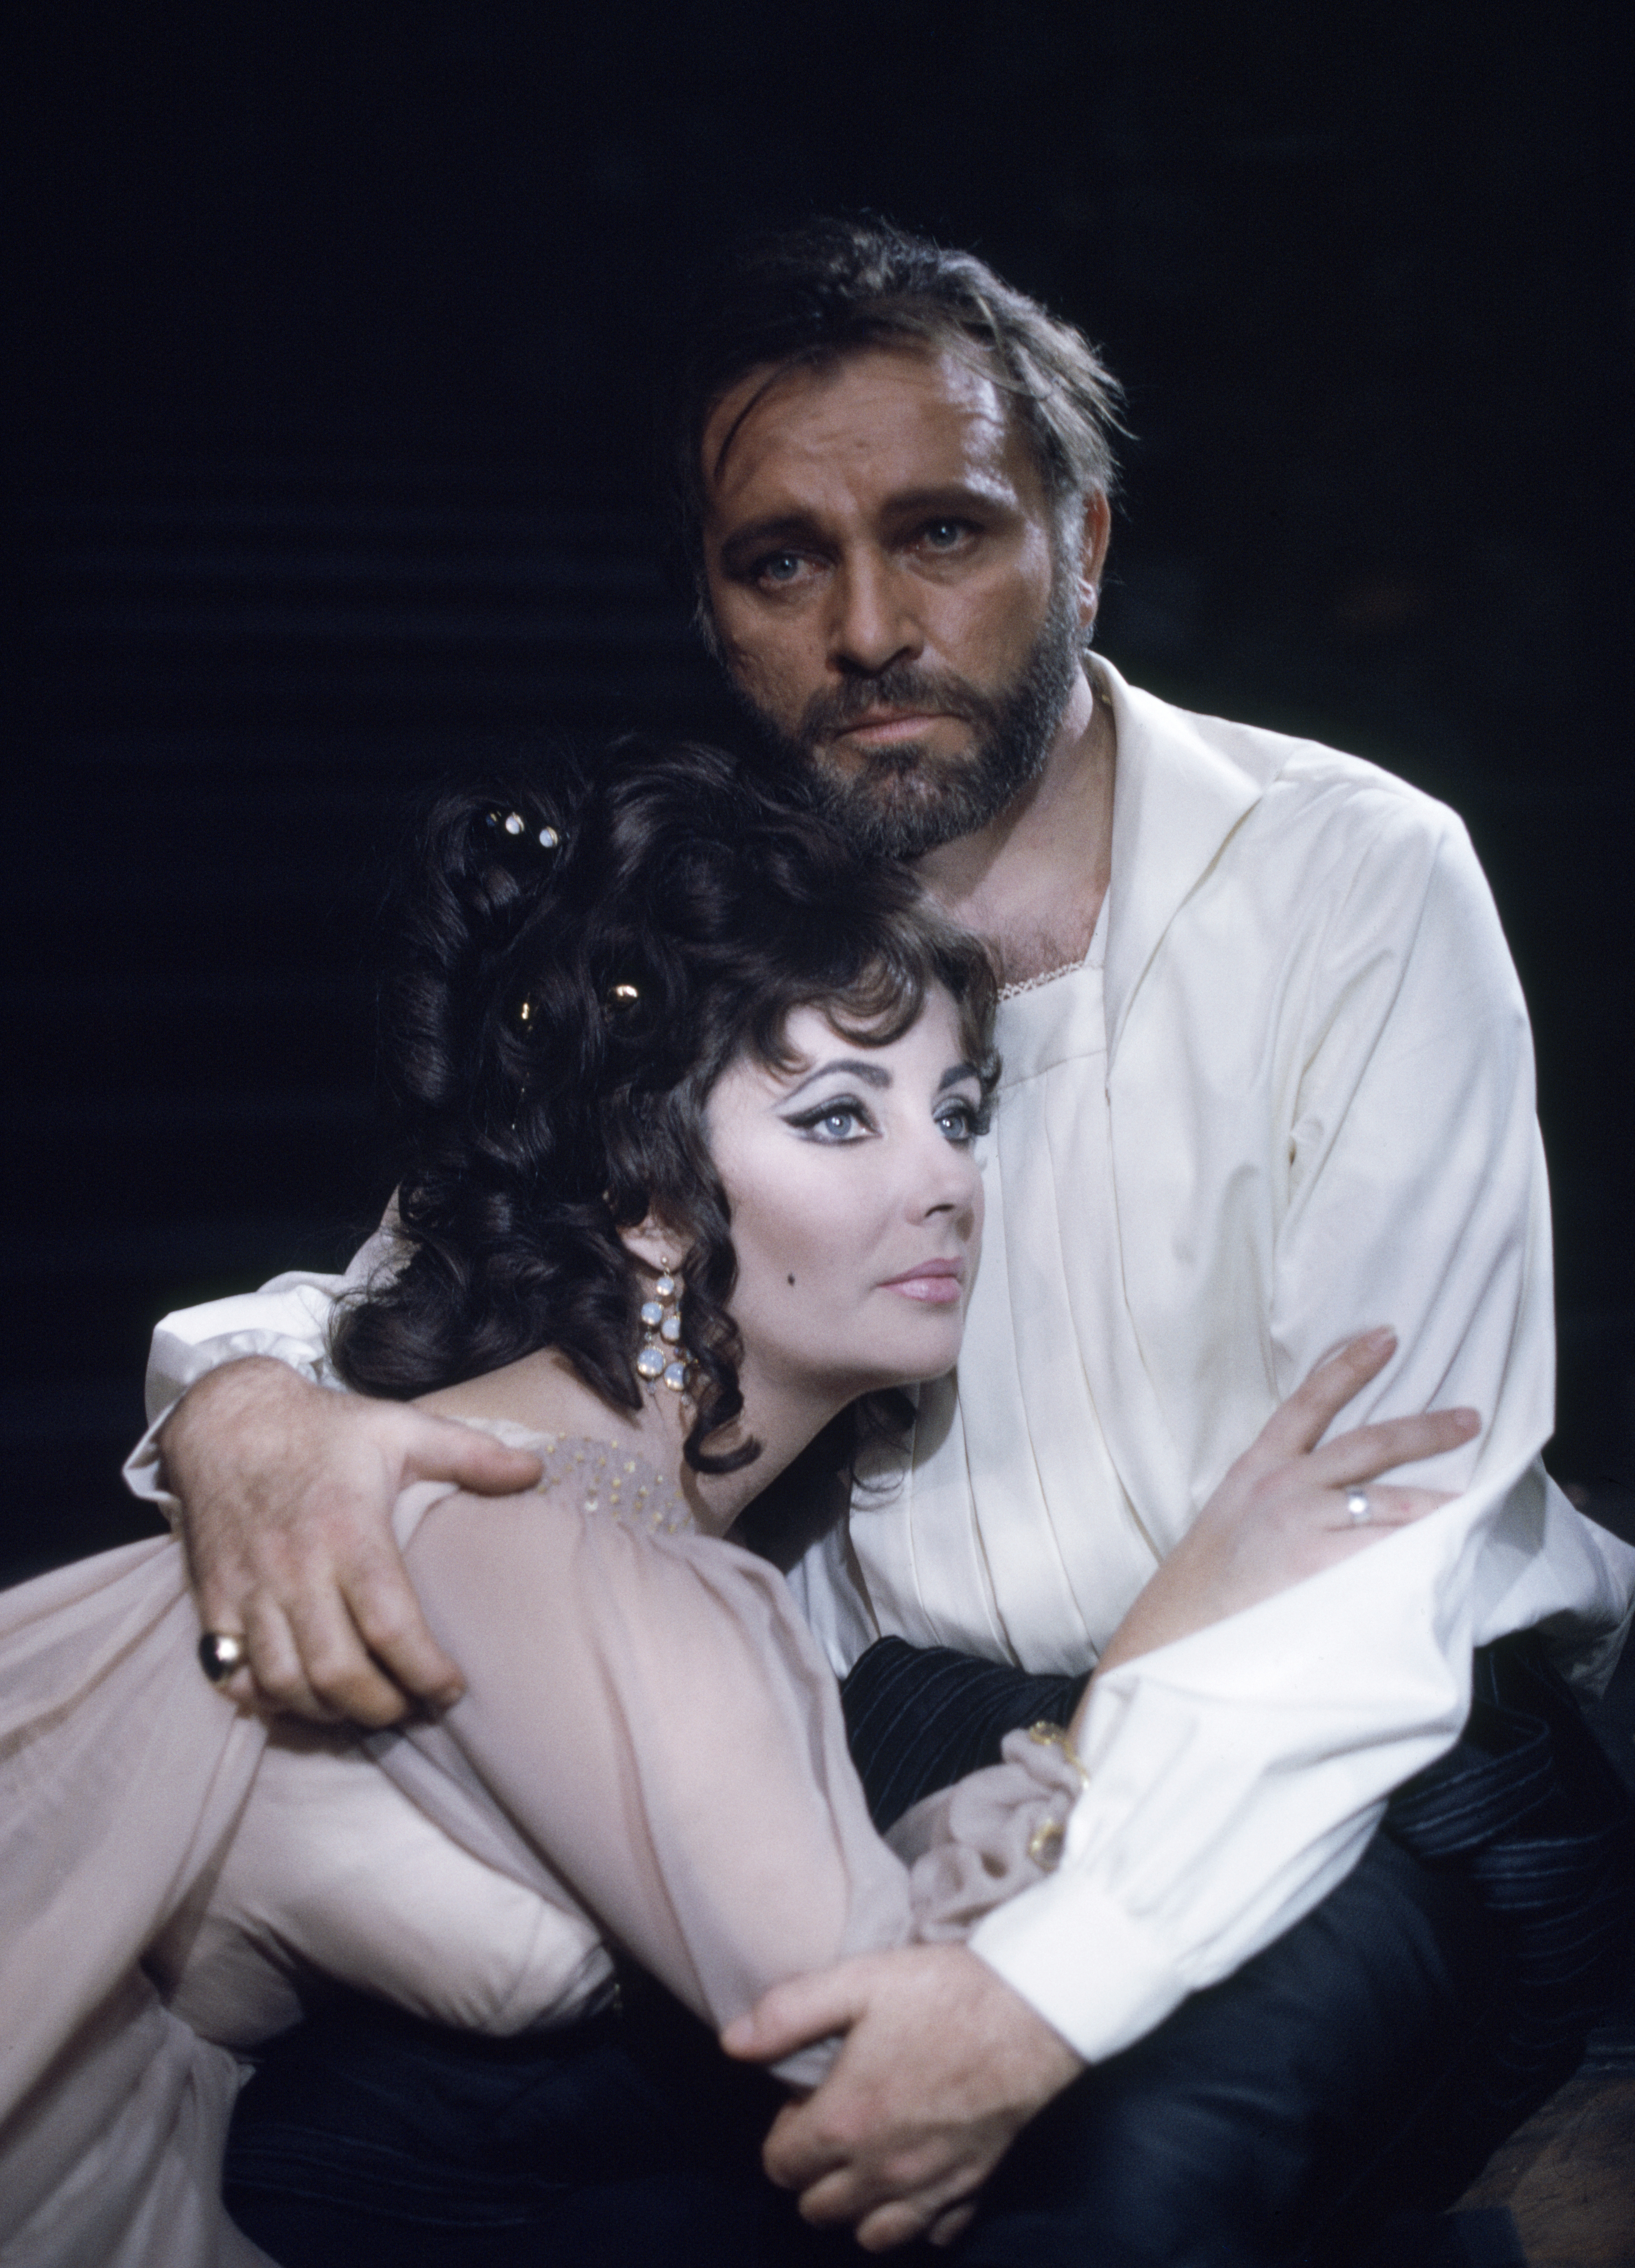 Welsh actor Richard Burton (1925-1984) and his wife, actress Elizabeth Taylor (1932-2011) in costume as 'Dr Faustus' and Helen of Troy in an Oxford University Dramatic Society production of the play by Christopher Marlowe at the Oxford Playhouse on Valentine's Day, 1966. | Source: Getty Images